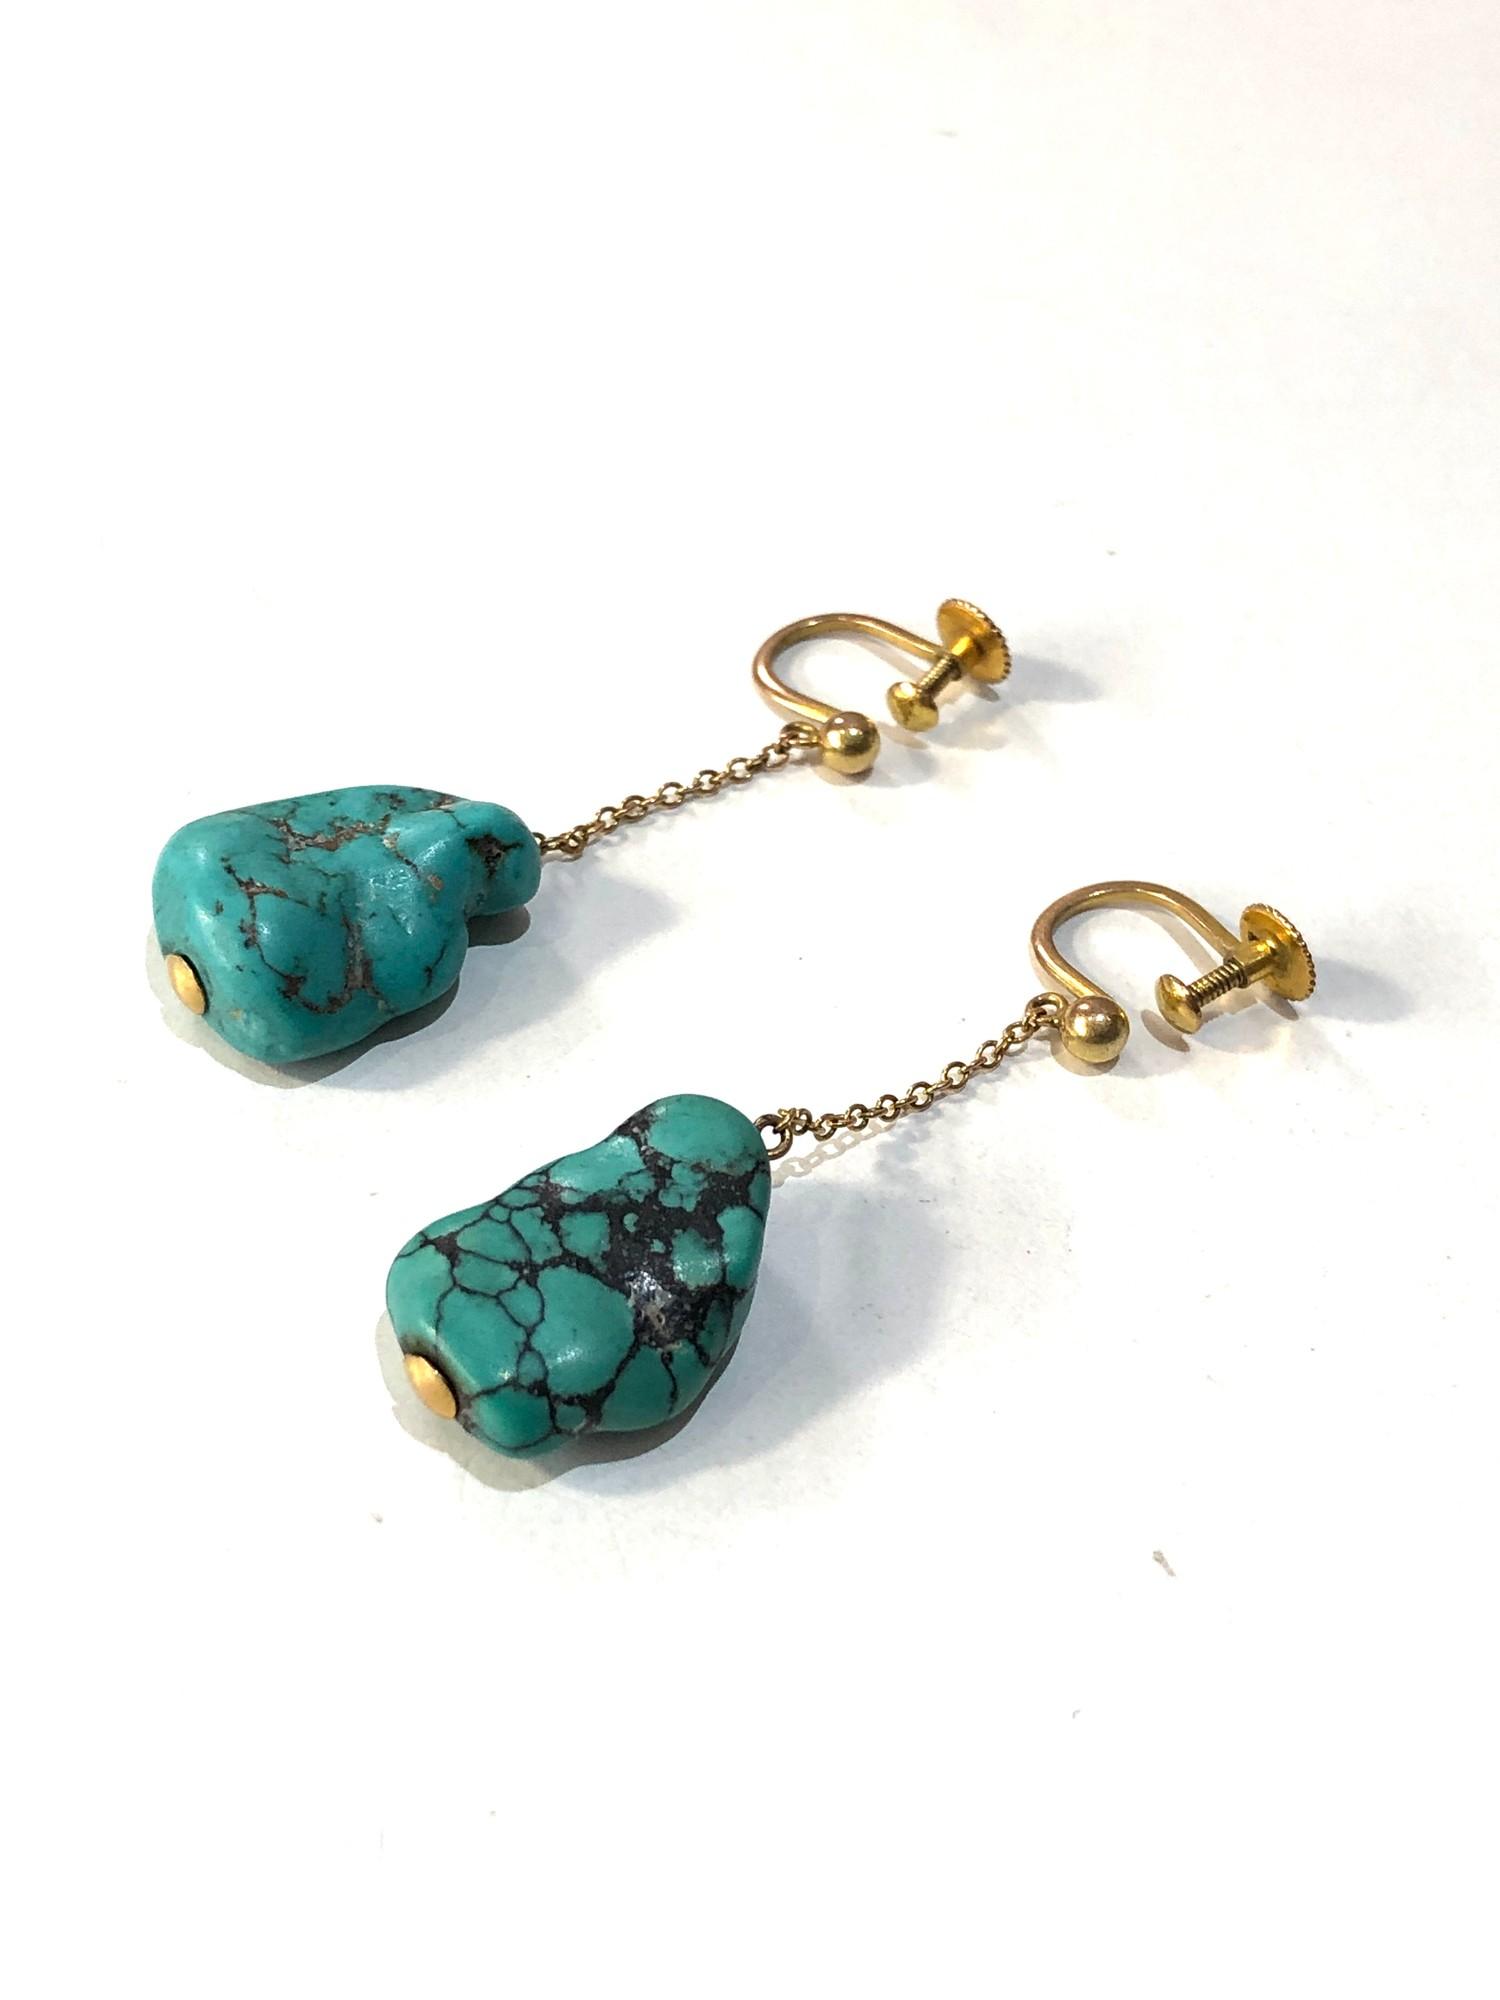 Vintage 9ct Gold and Matrix Turquoise drop earrings measure approx 4cm drop in good condition